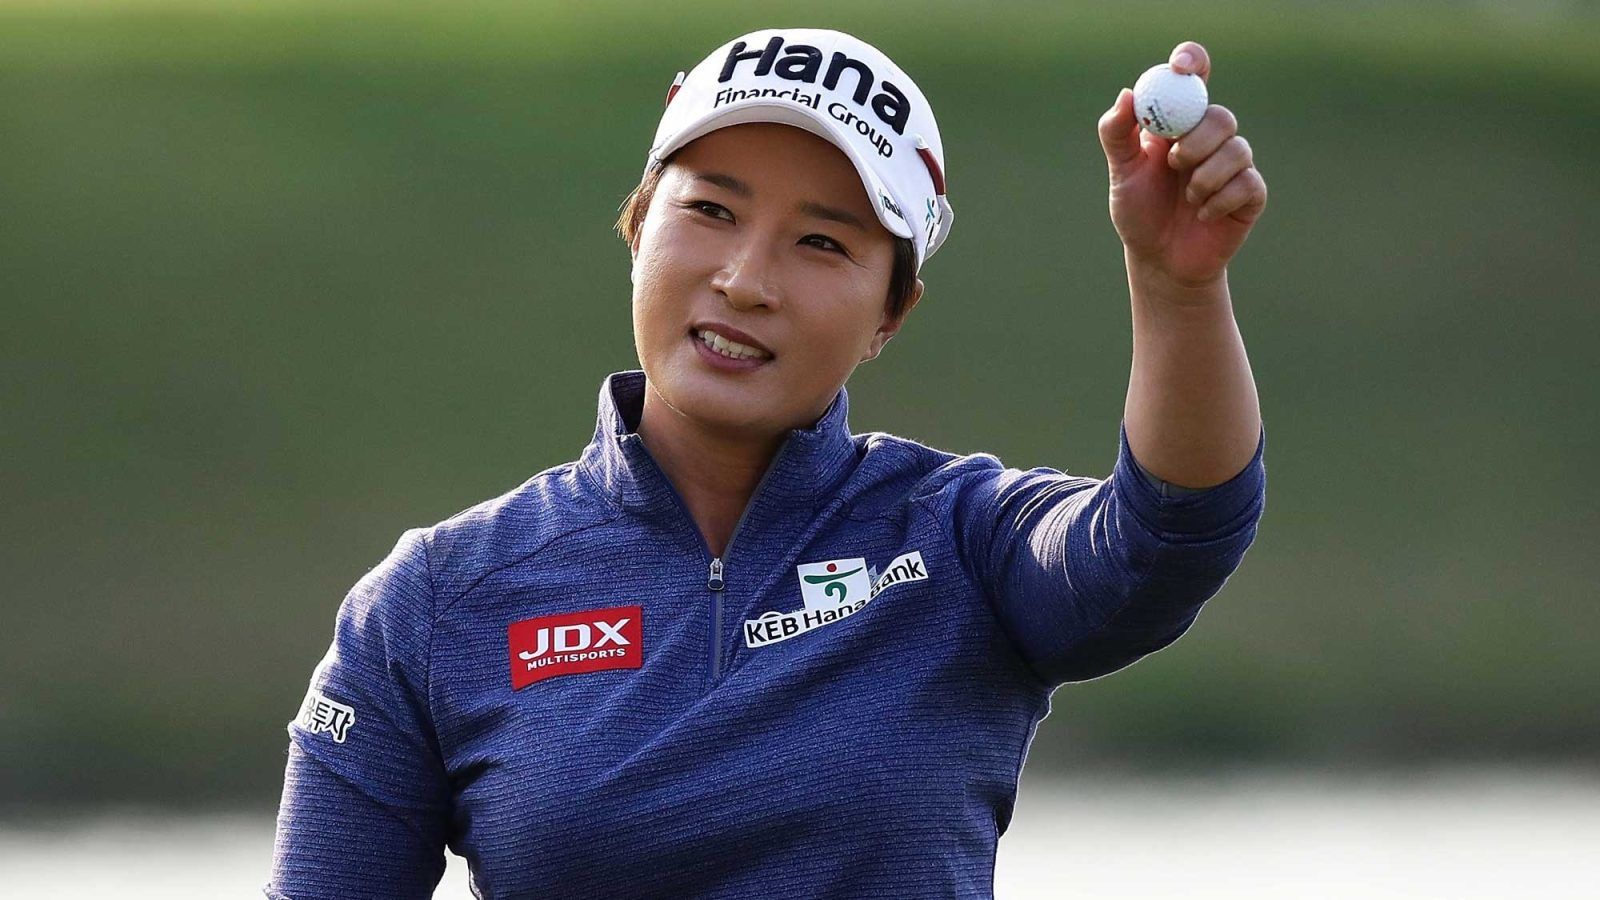 Get to know 15 of the best Asian female golfers of all time